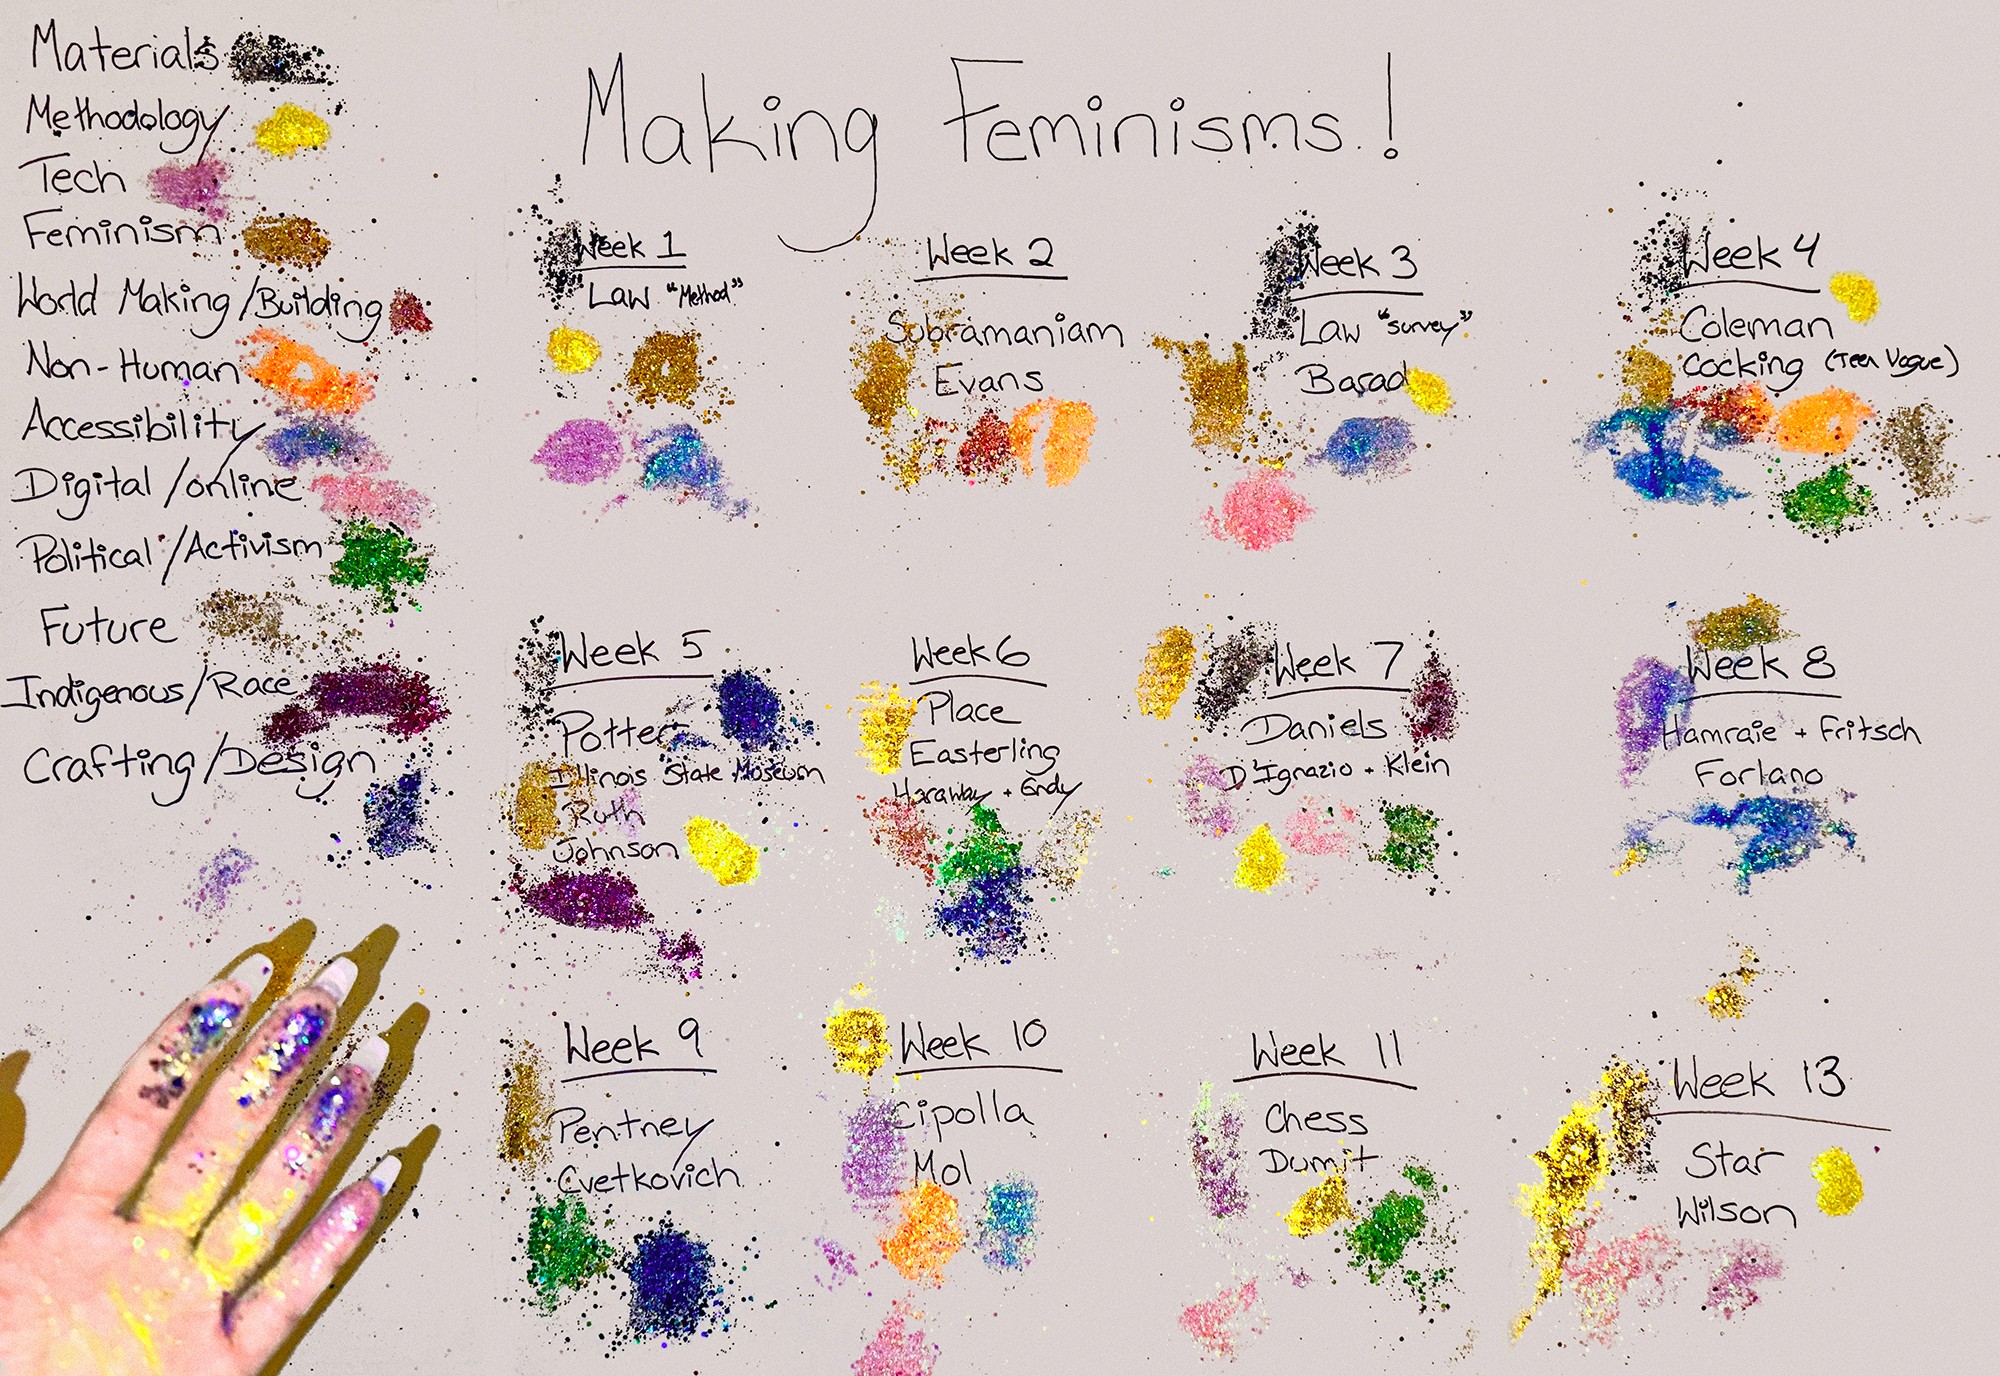 “Making Feminisms!” by anonymous student